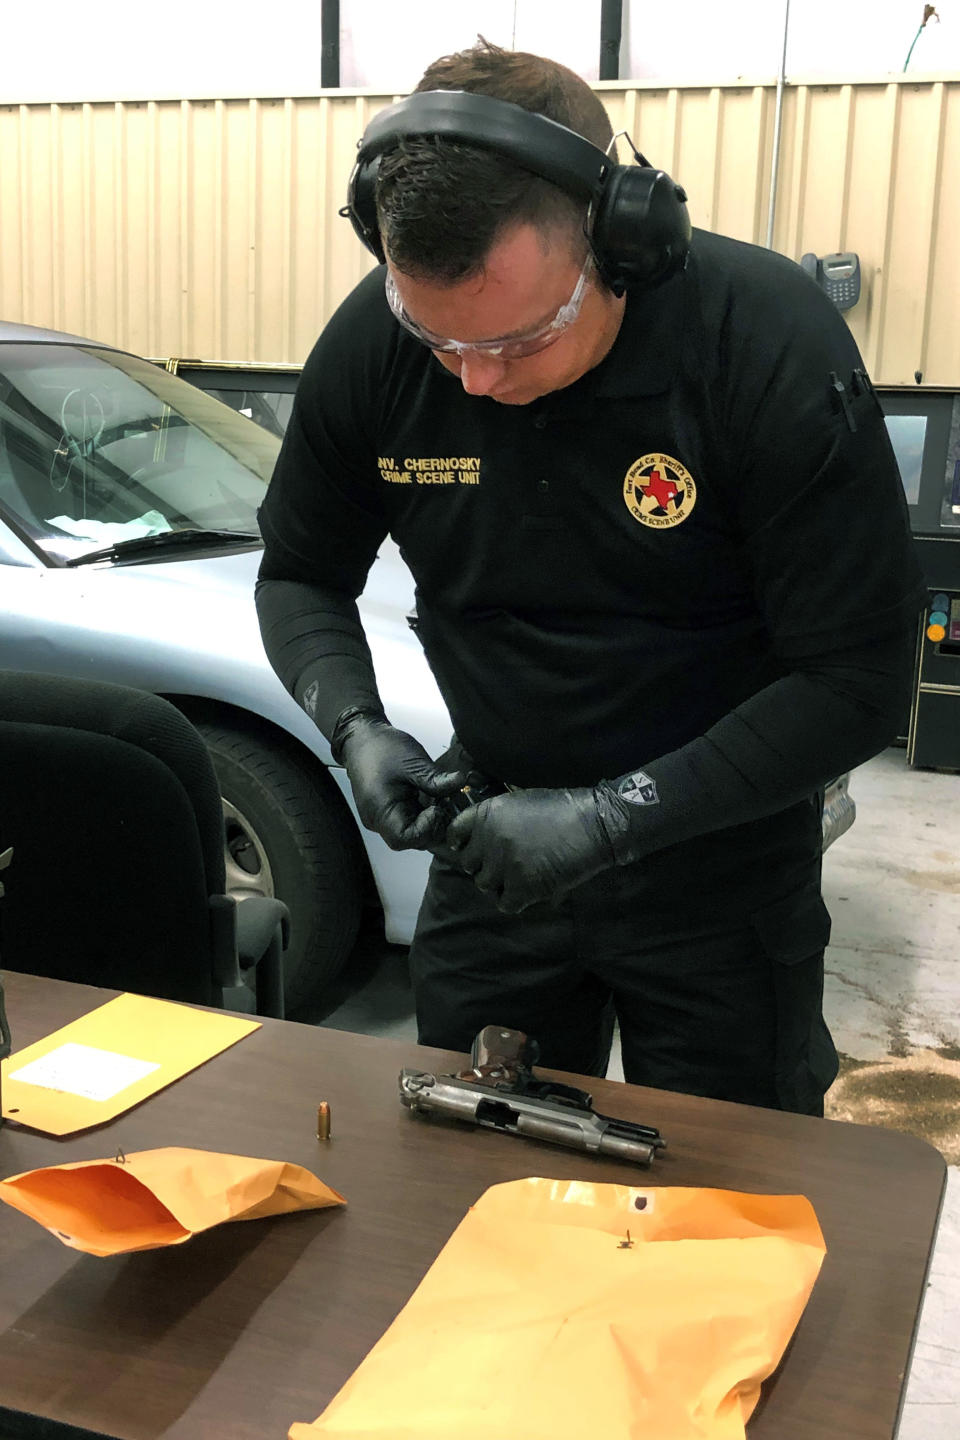 In this Monday, July 1, 2019 photo, Fort Bend County Sheriff's Office crime scene investigator David Chernosky prepares to test fire a handgun in Richmond, Texas, seized during a drug arrest so that another investigator can take the bullet casings and scan images of the casings and then upload them to a federal ballistics database. (AP Photo/Juan Lozano)